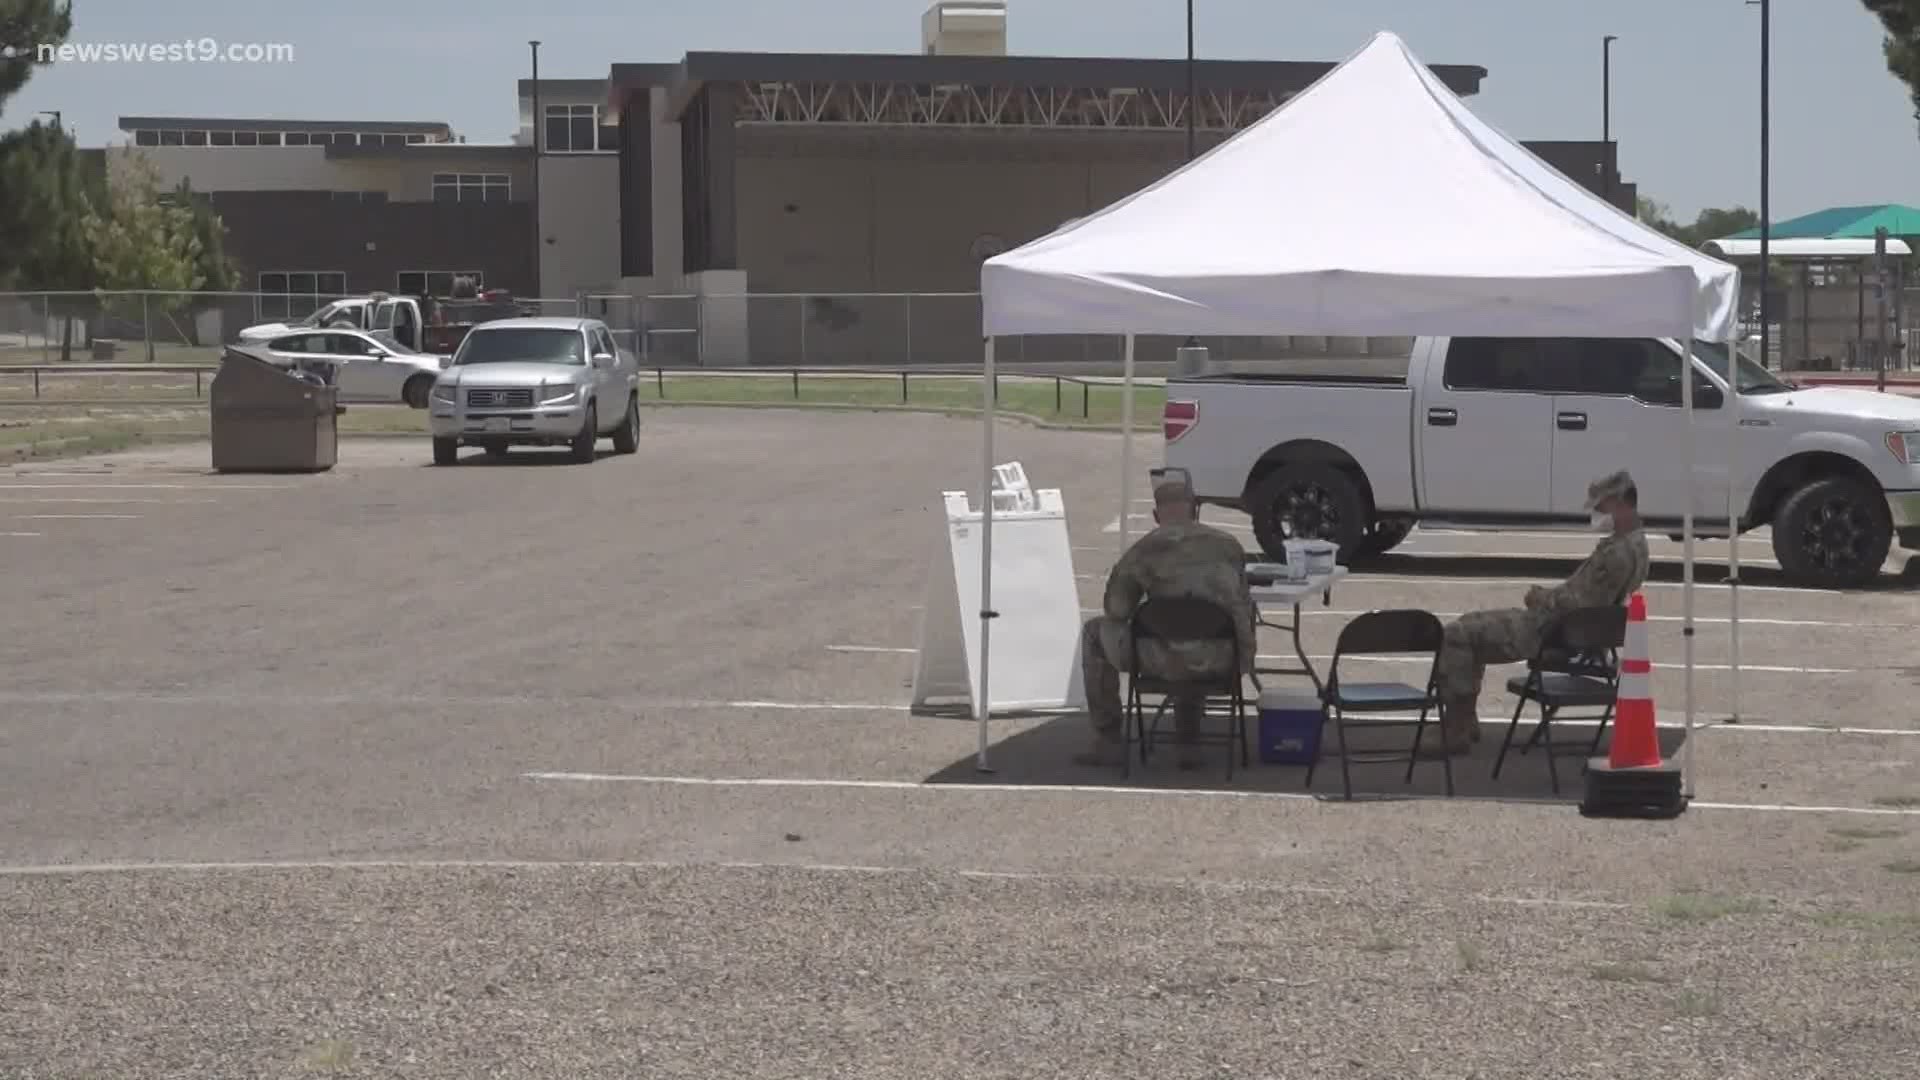 The National Guard will be in Andrews County testing for COVID-19 using cheek swabs instead of nasal swabs.